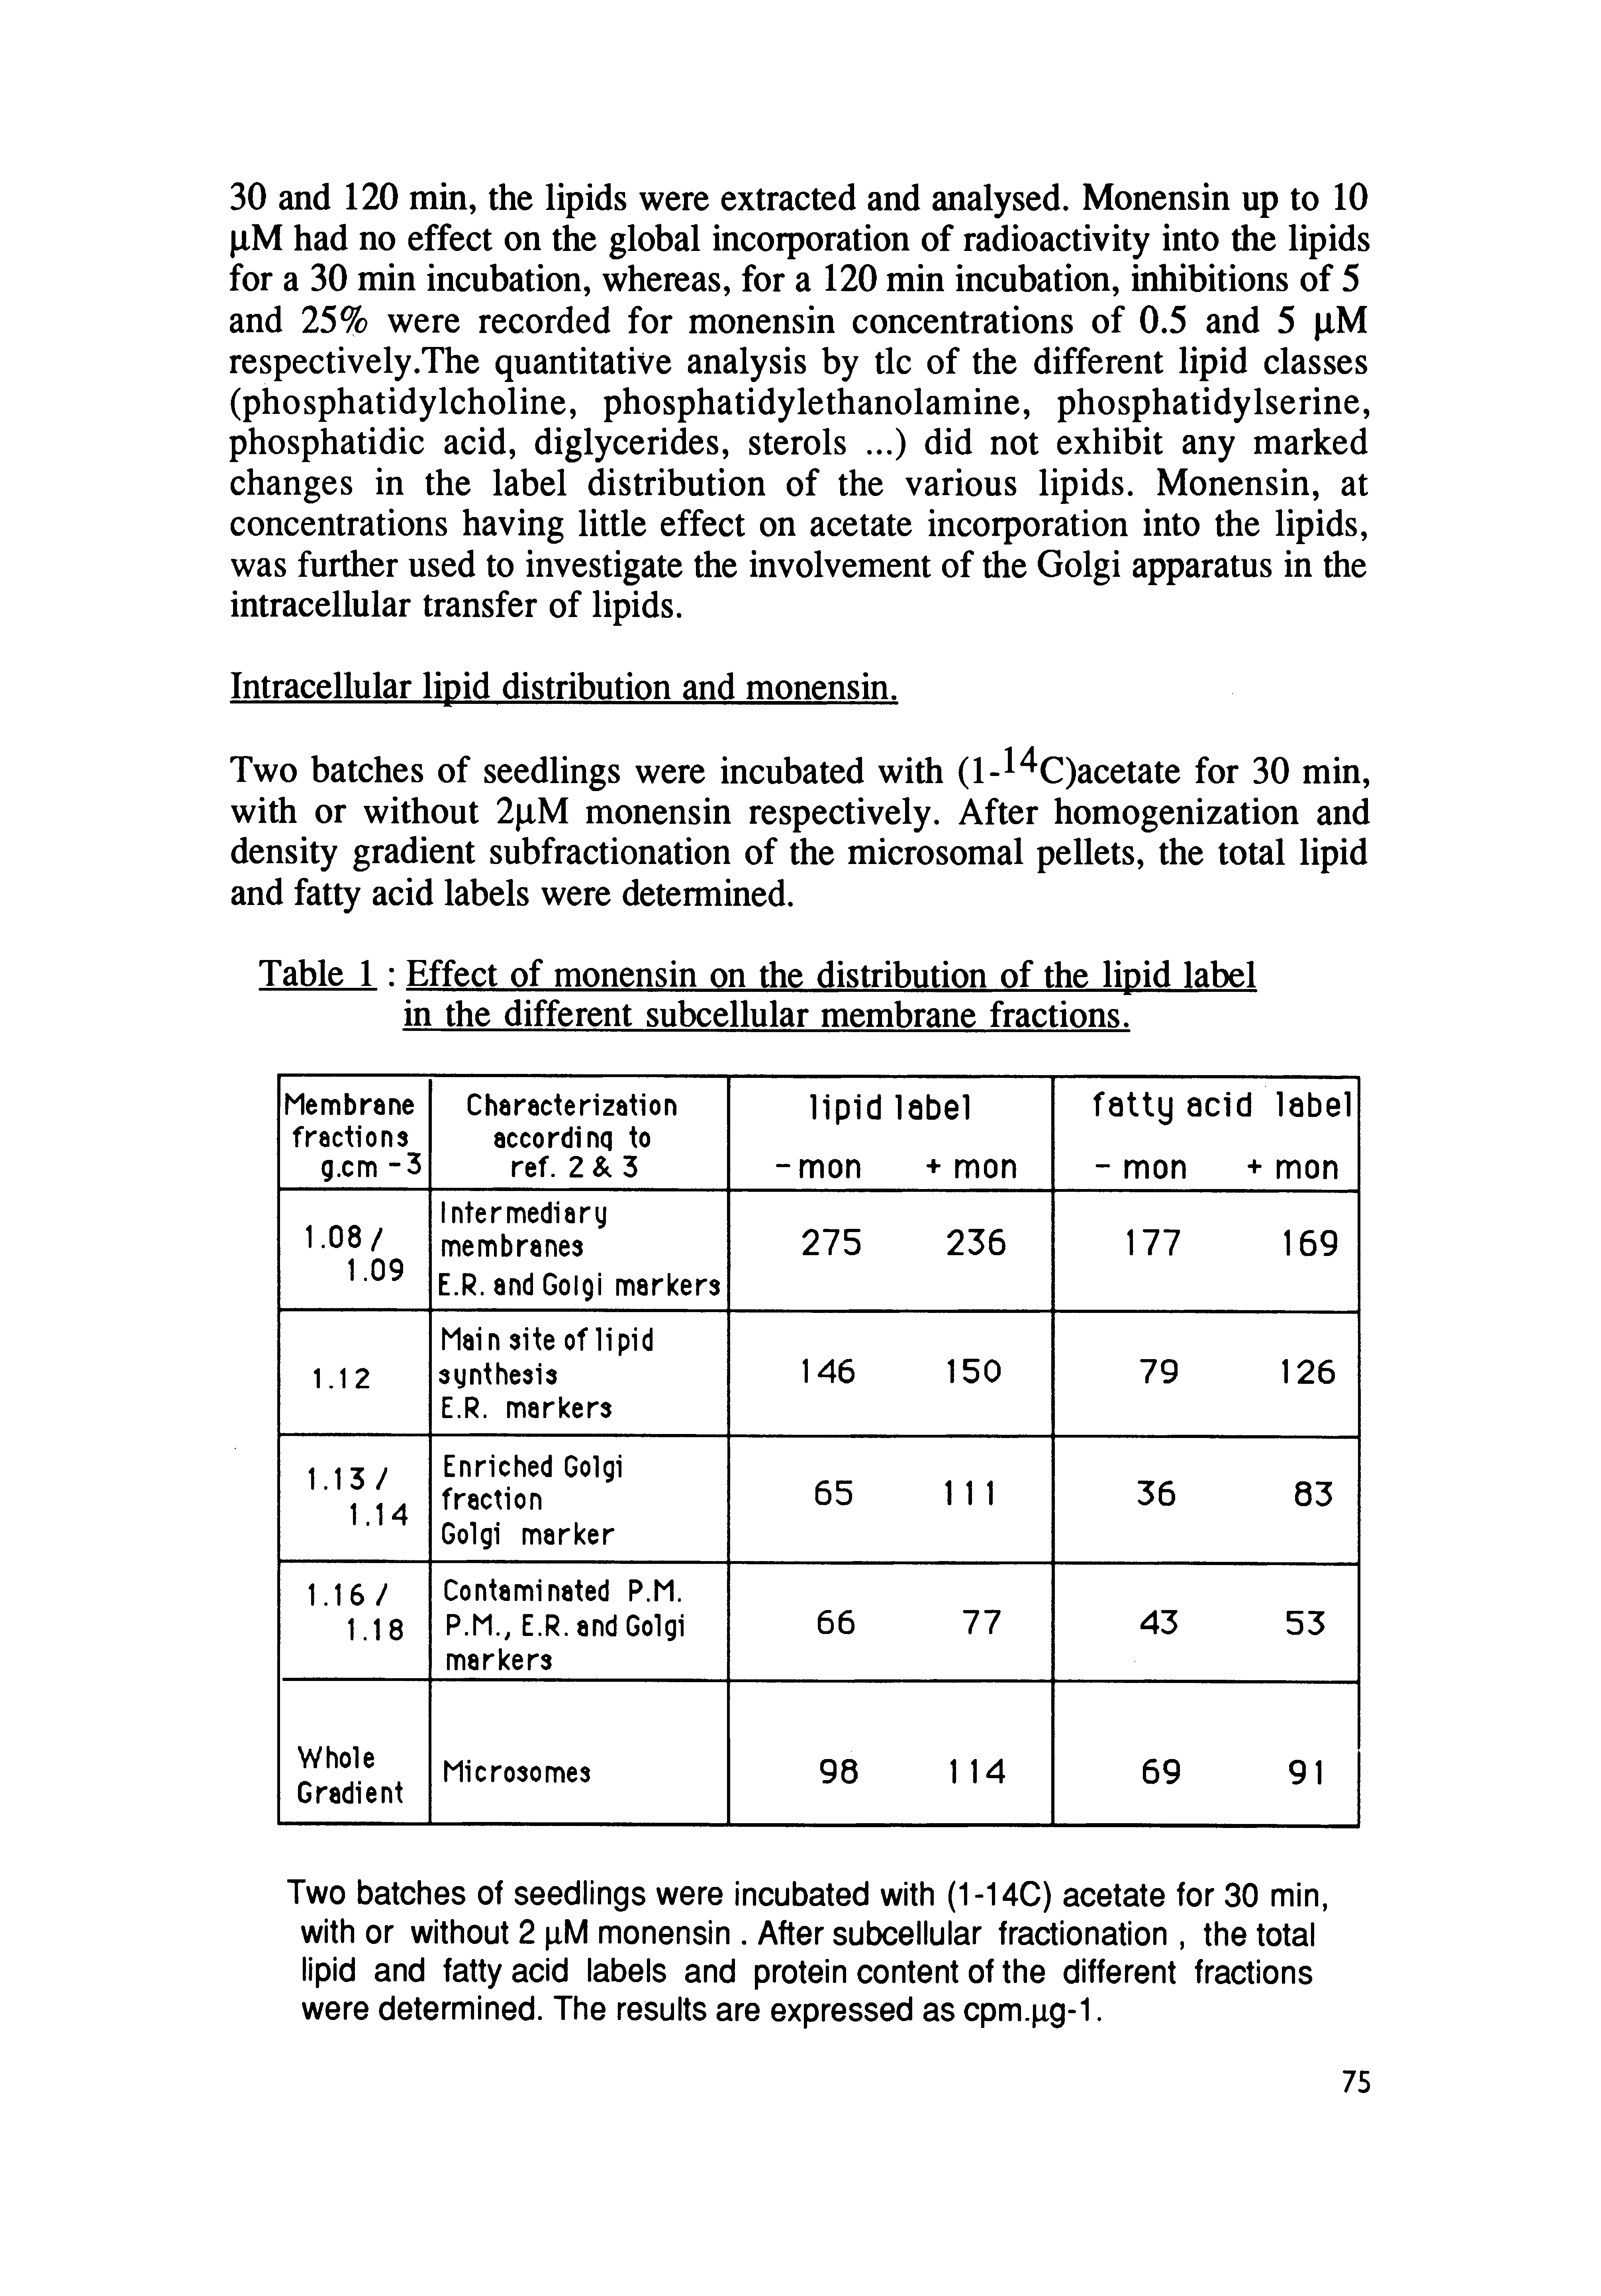 Table 1 Effect of monensin on the distribution of the lipid label in the different subcellular membrane fractions.